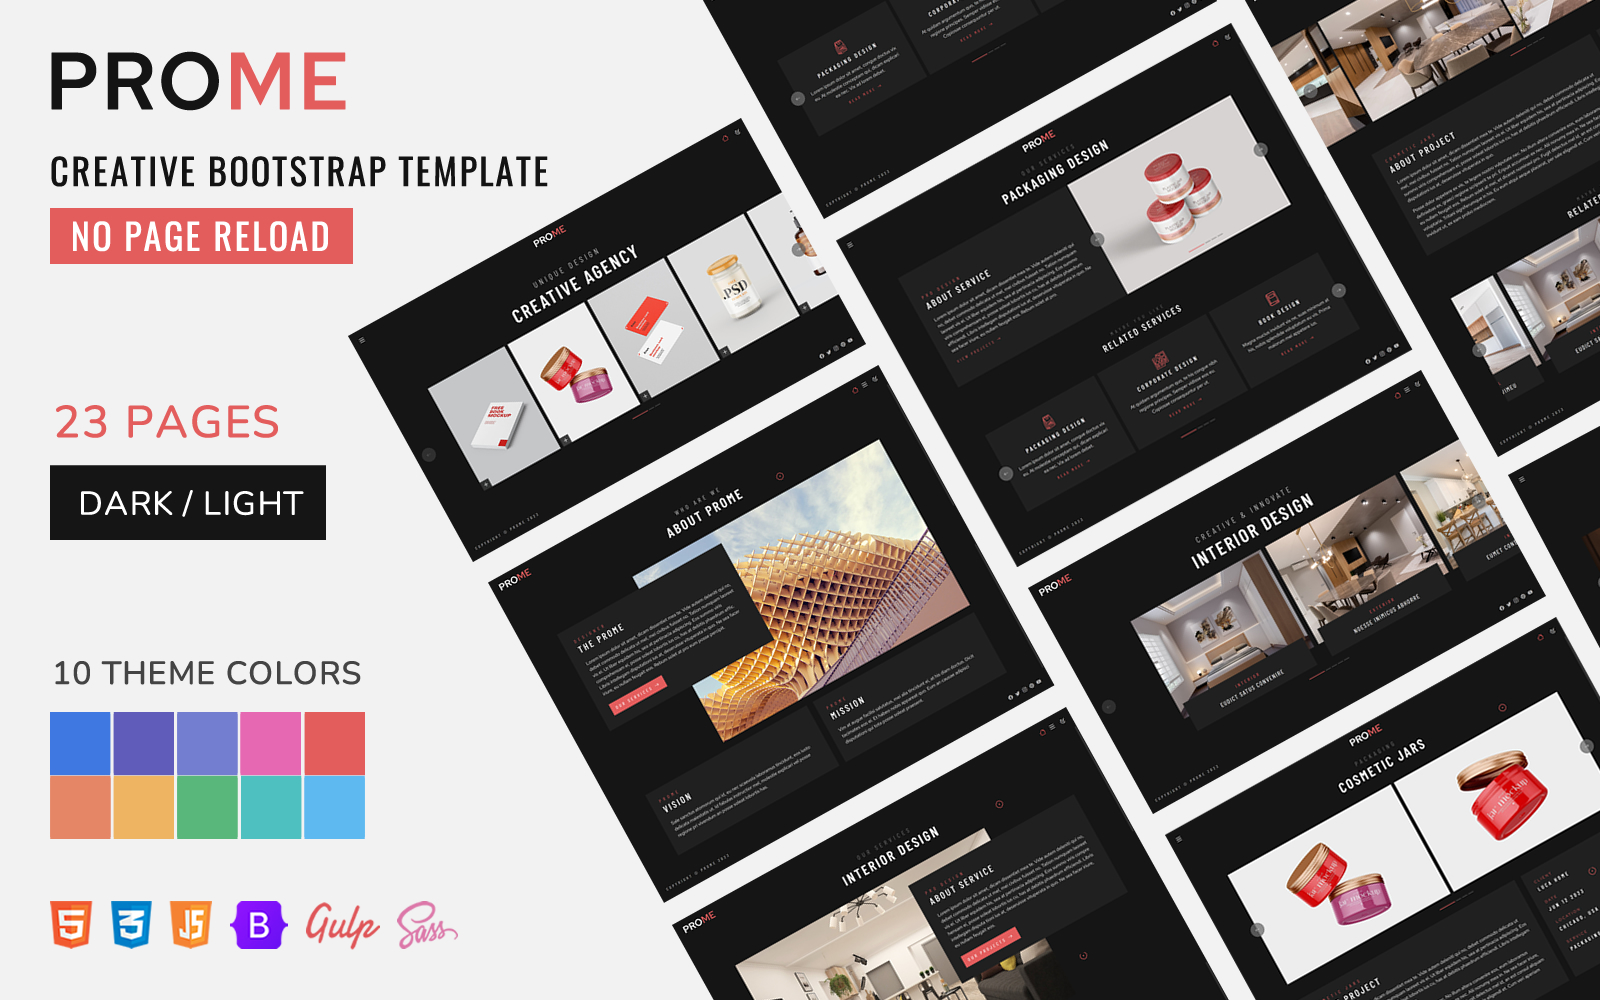 Prome - Creative Bootstrap Template + No Page Reload